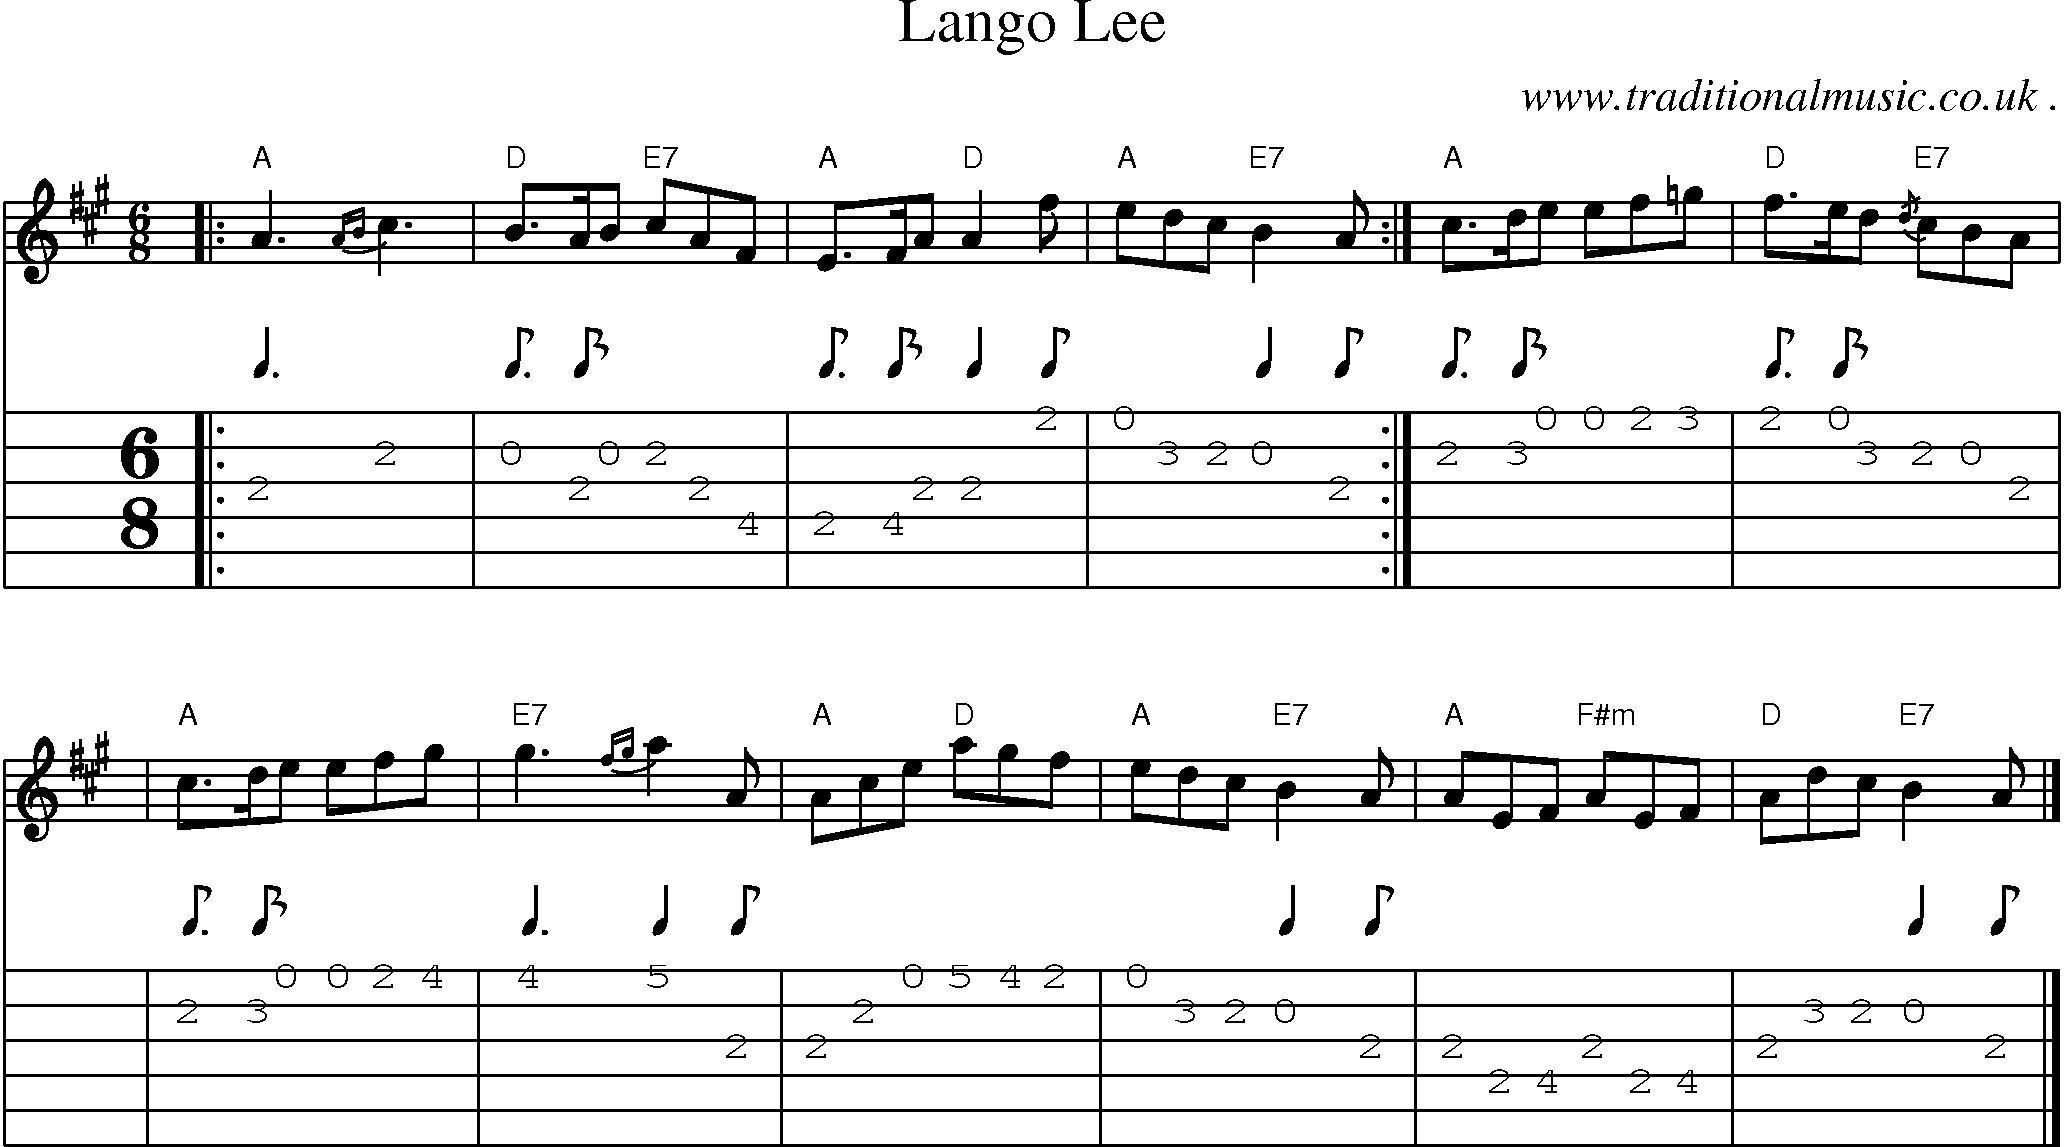 Sheet-music  score, Chords and Guitar Tabs for Lango Lee